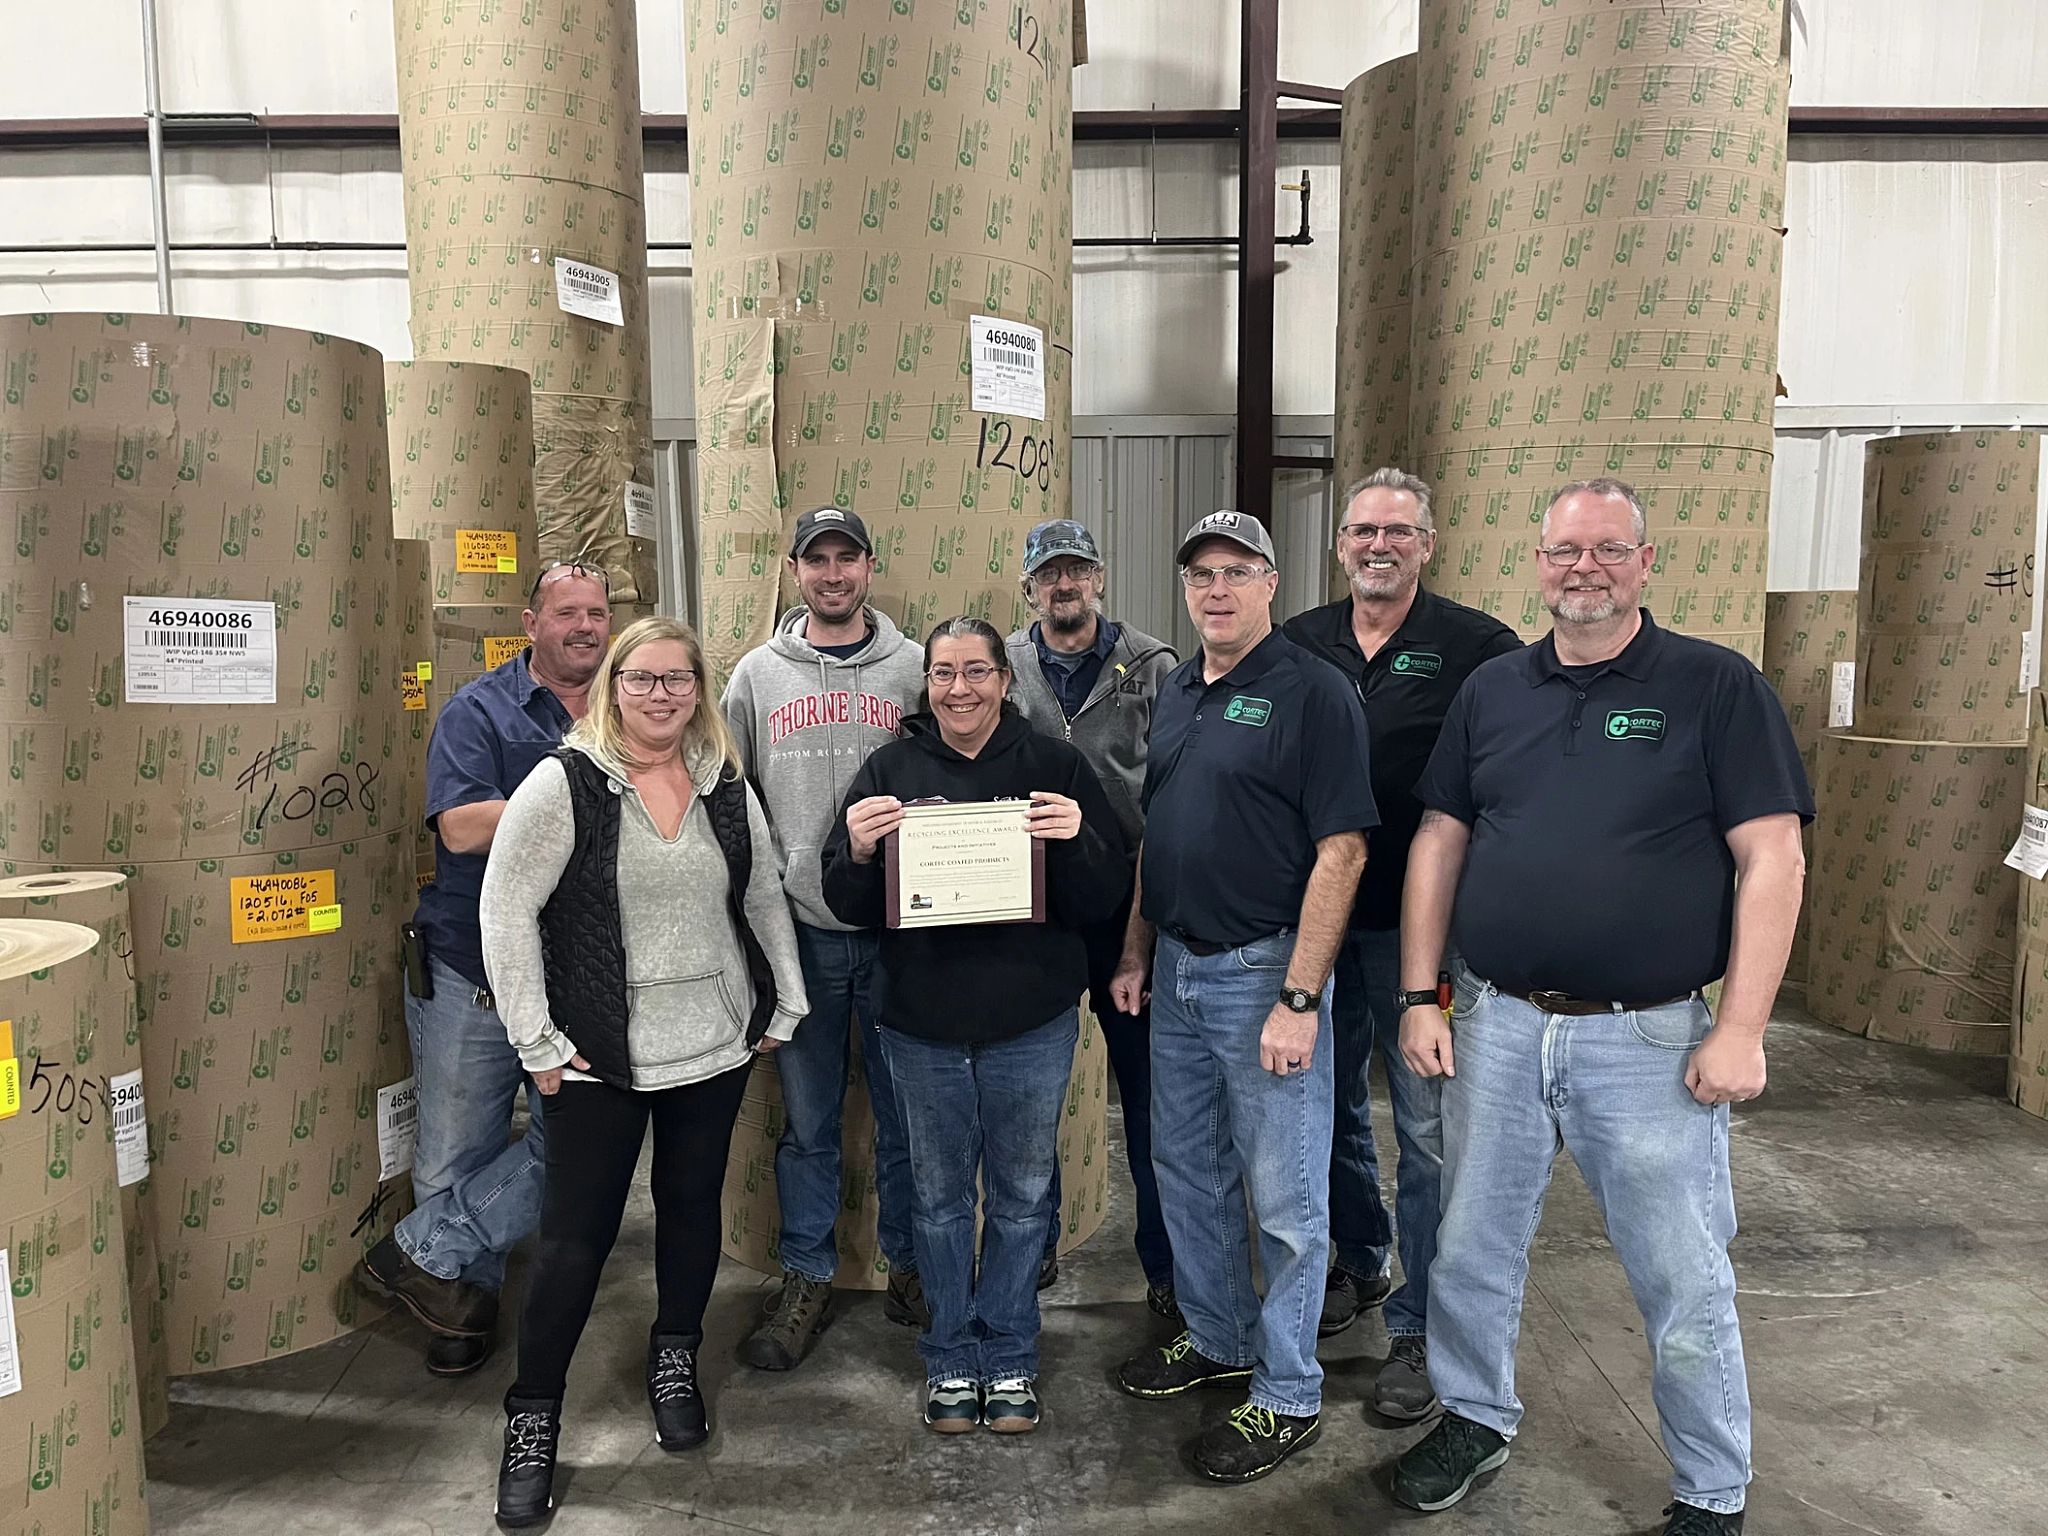 The team at Cortec Coated Products gathers together in front of giant rolls of coated paper. The team member in the center holds the business's 2023 Wisconsin Recycling Excellence Award certificate from the DNR.